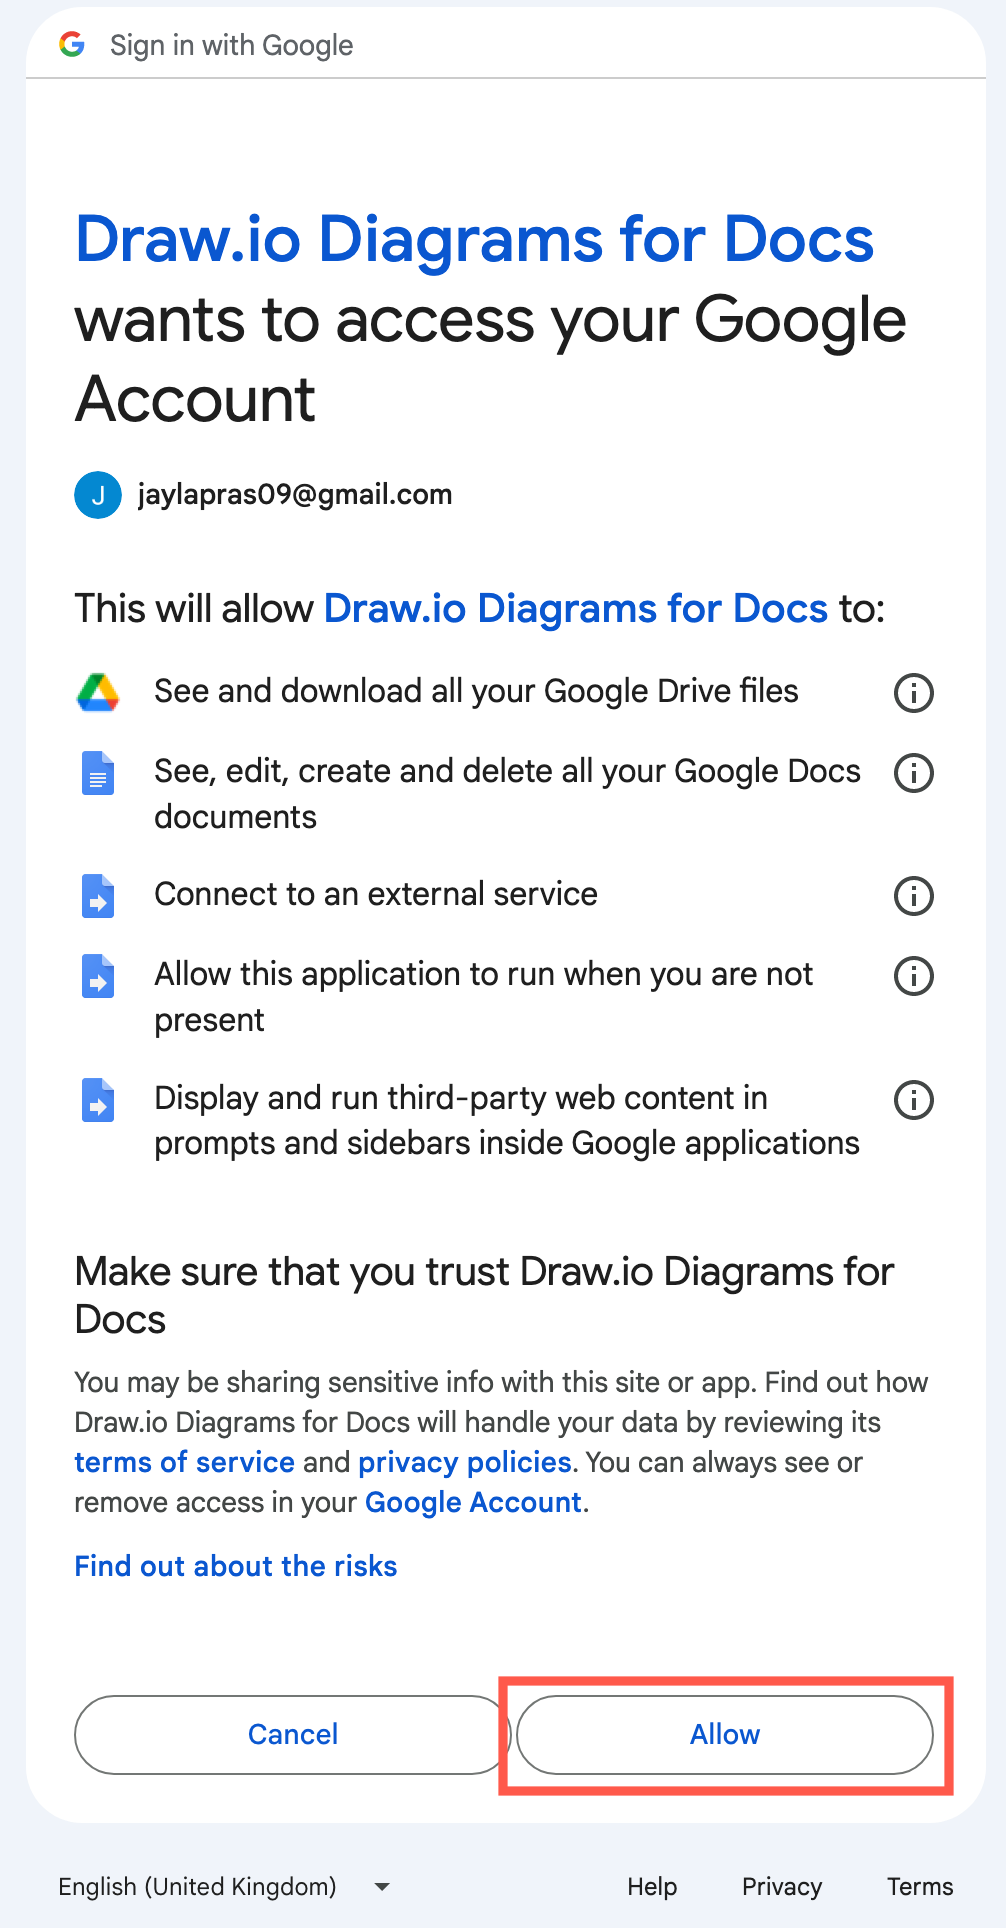 Grant permission for the editor to access your Google Drive files and Google Docs